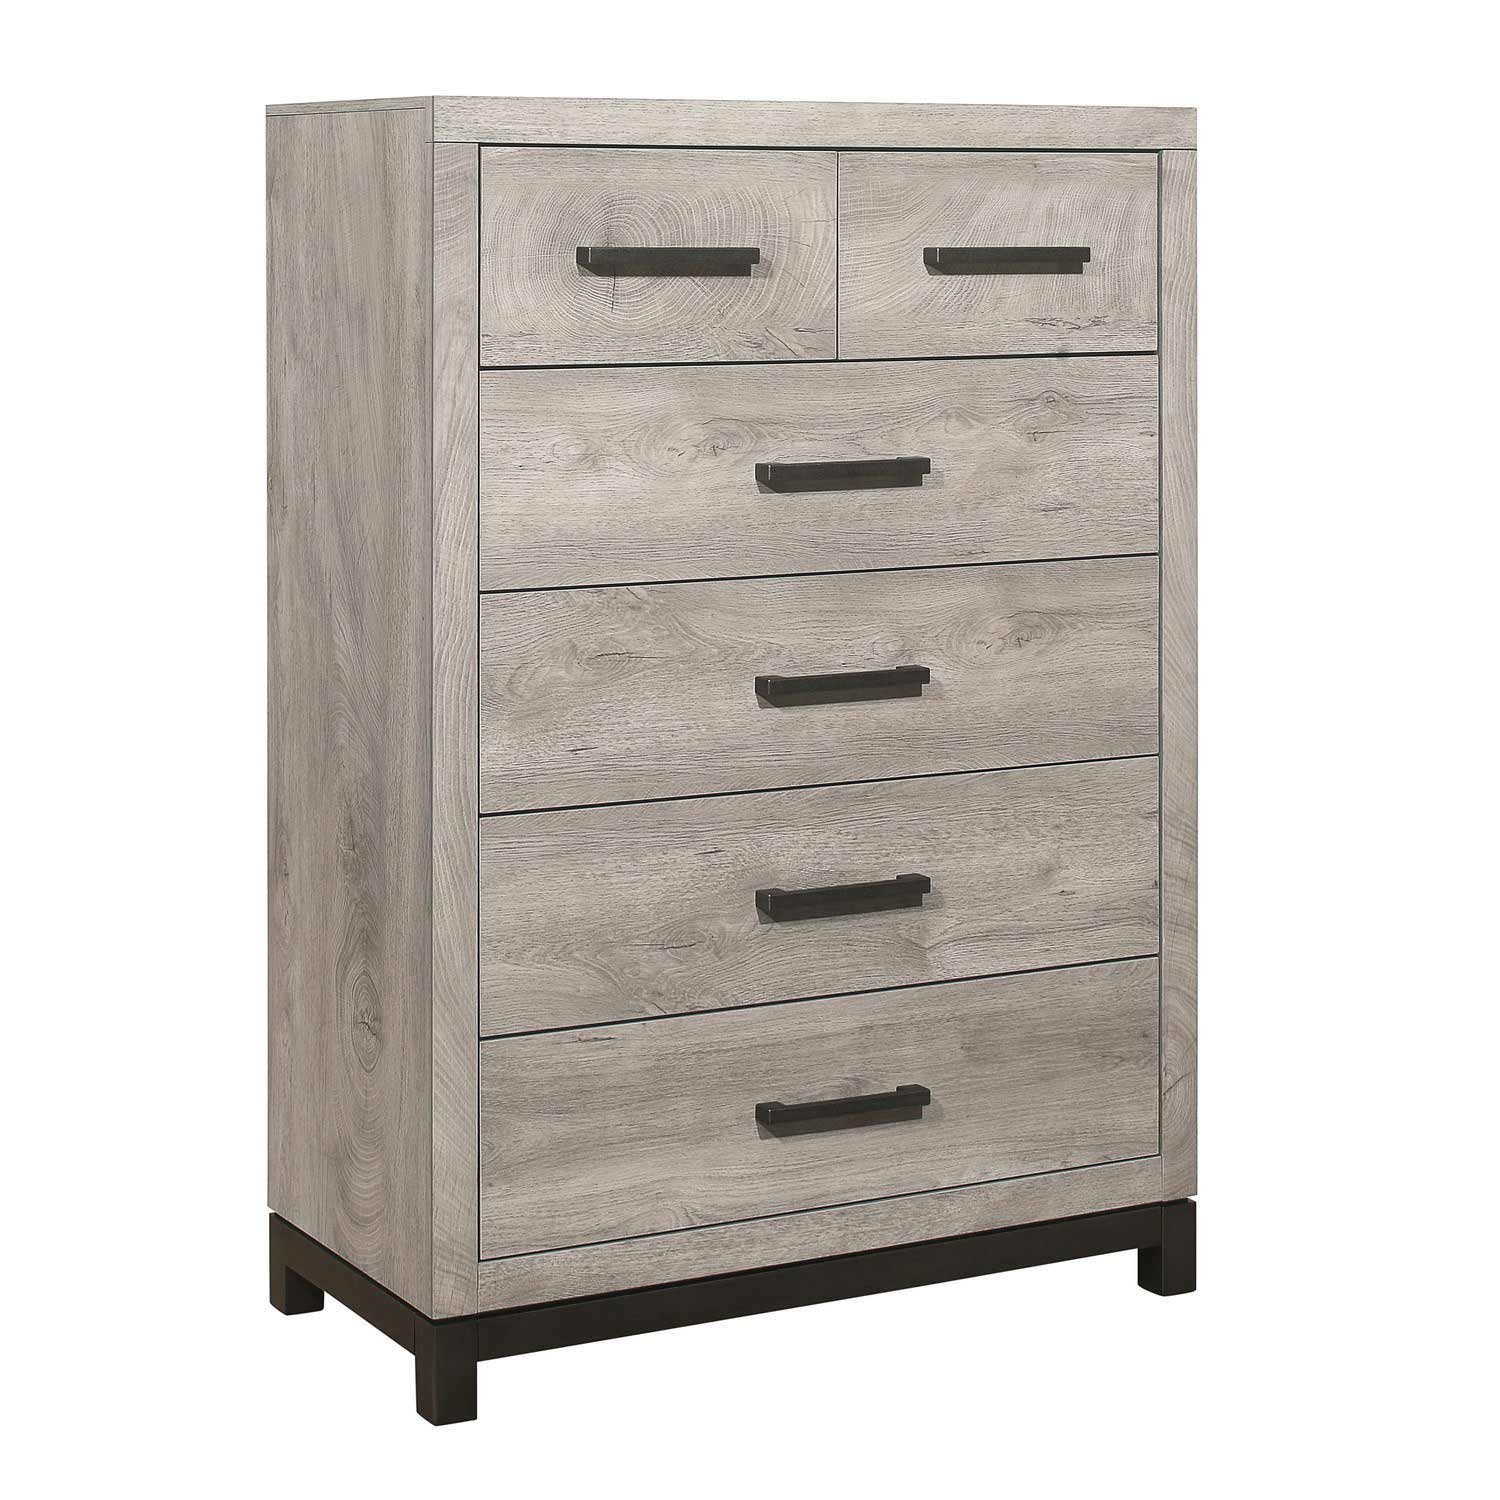 Homelegance Zephyr Chest - Two-tone : Light Gray And Gray